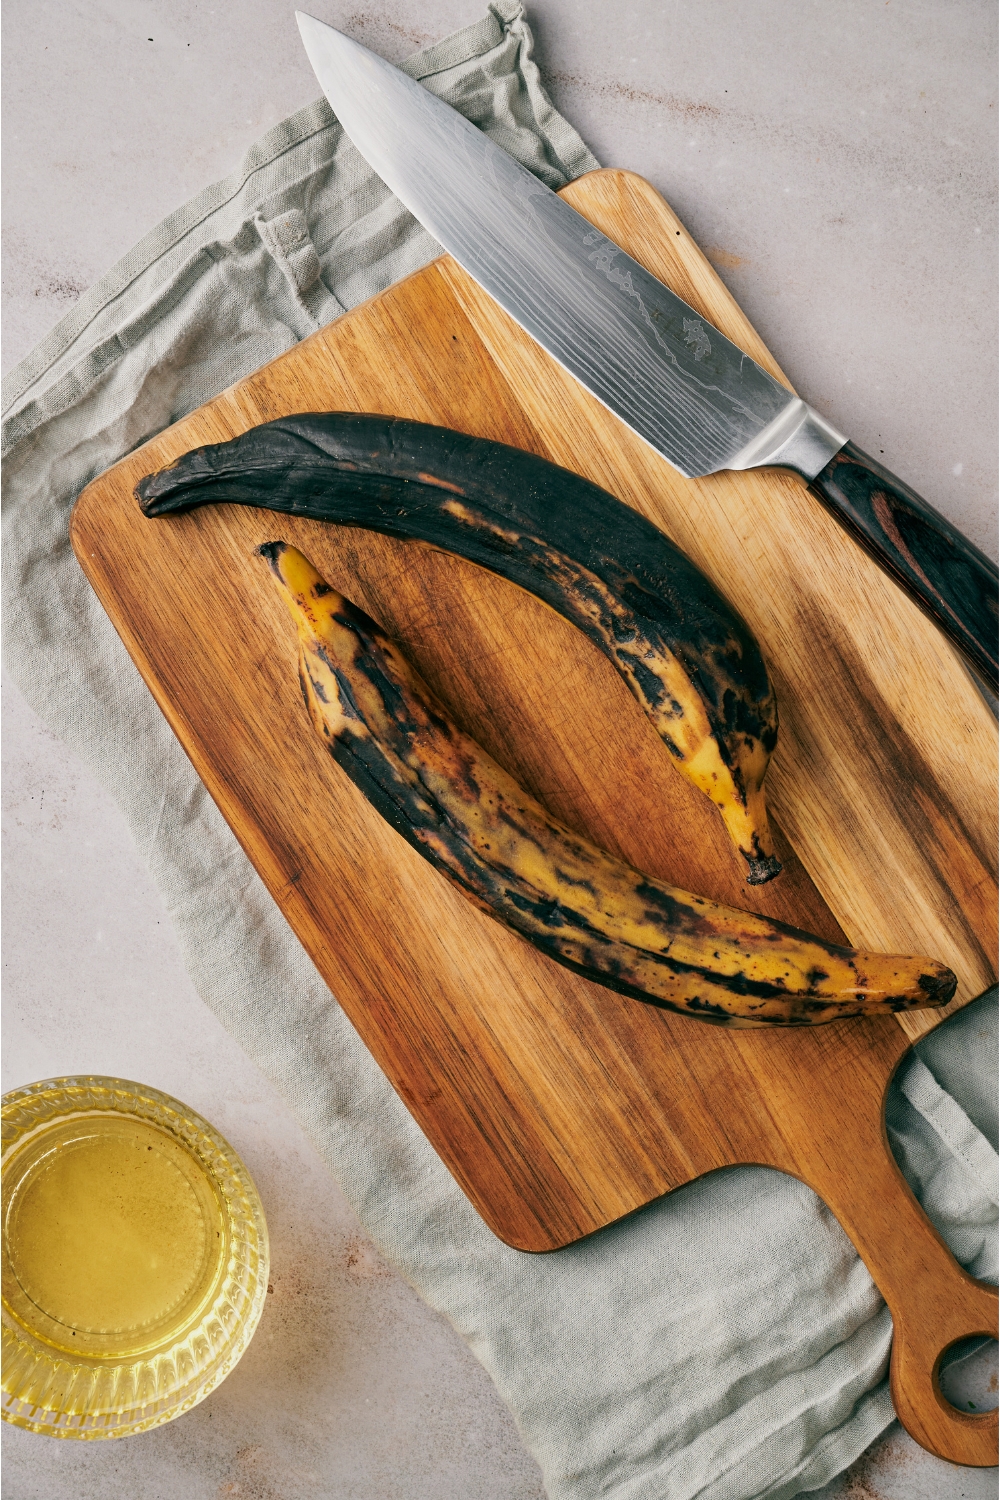 A wood cutting board with a sharp knife and two very ripe plantains on it. The board is next to a small dish of oil.